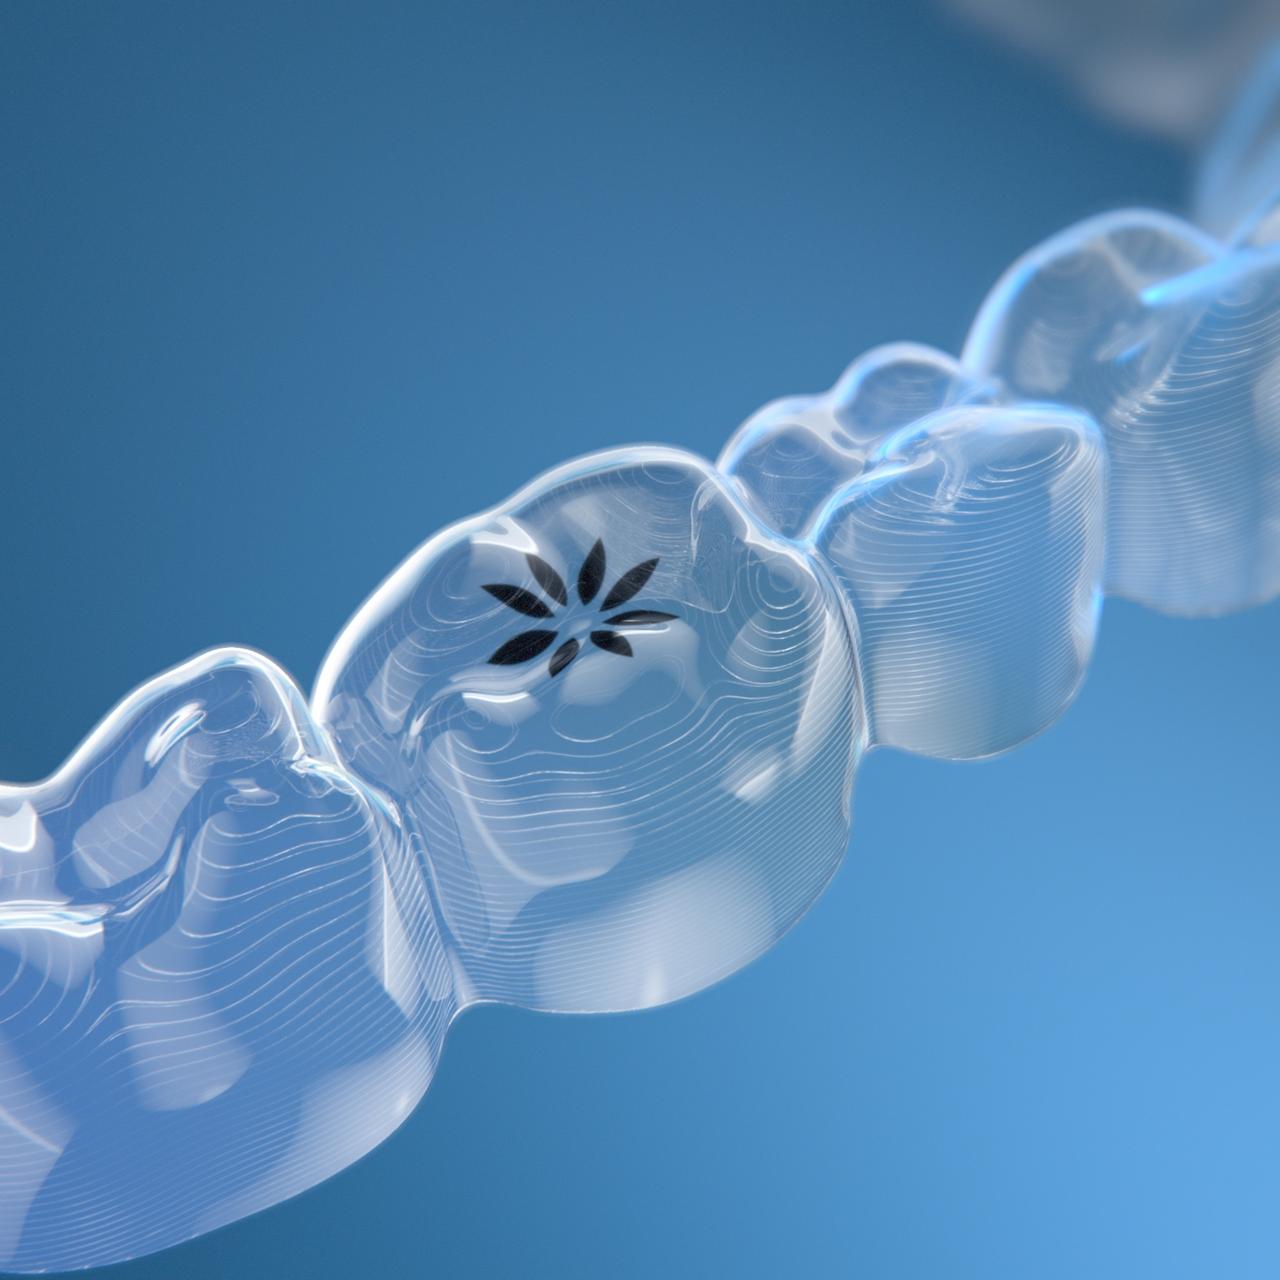 Sample of clear aligners on a blue background